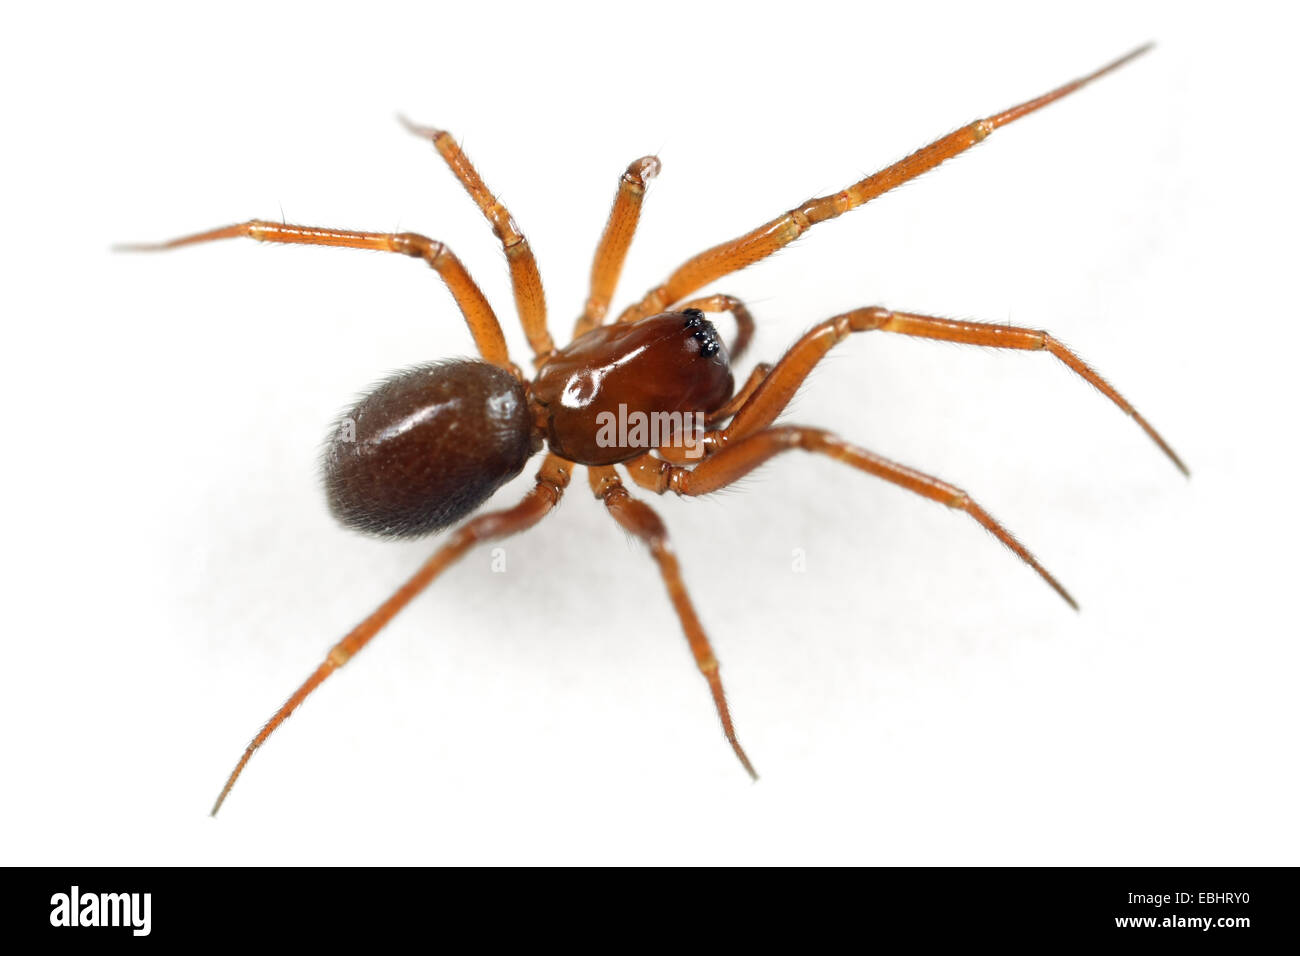 A female Winter Litter-Spider (Mmacrargus rufus) on a white background, part of the family Linyphiidae - Sheetweb weavers. Stock Photo